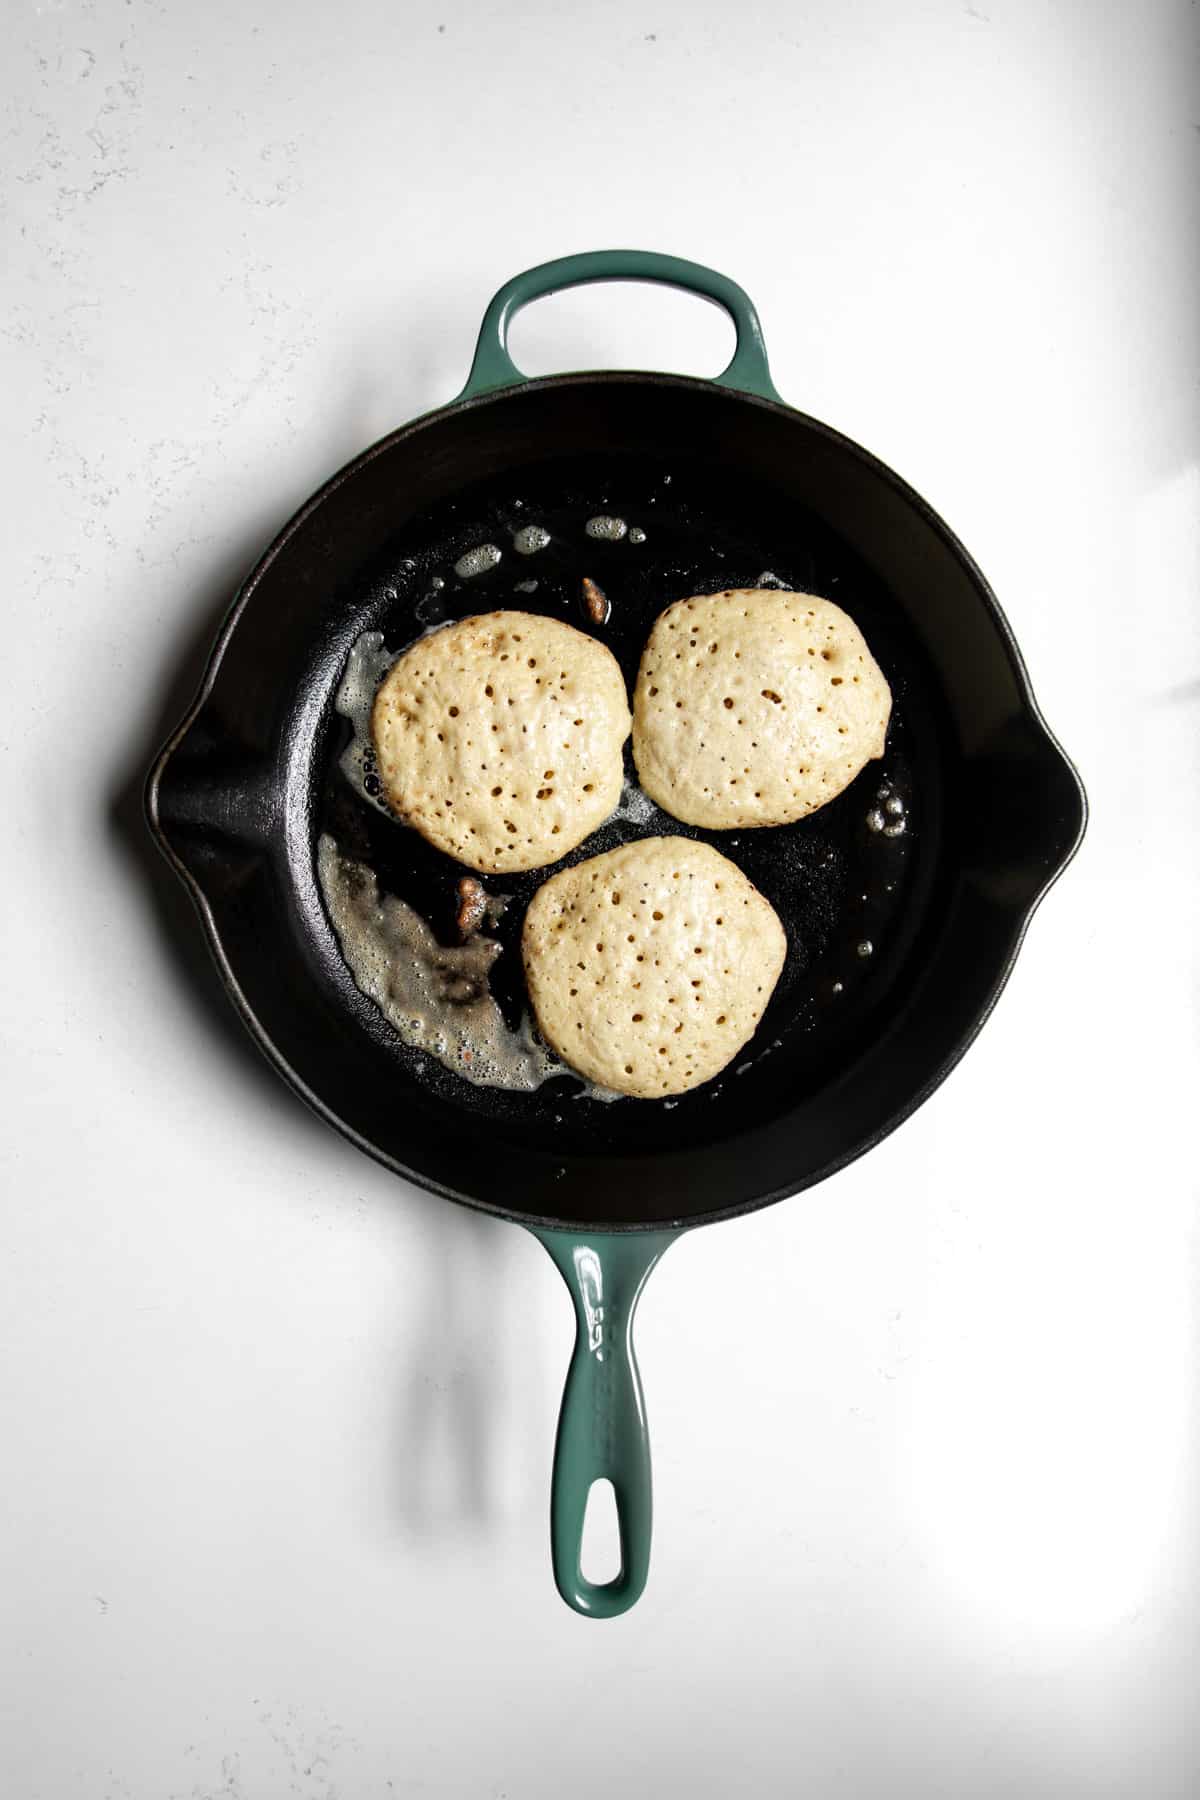 Three oat flour pancakes sitting on a skillet with bubbles before being flipped.